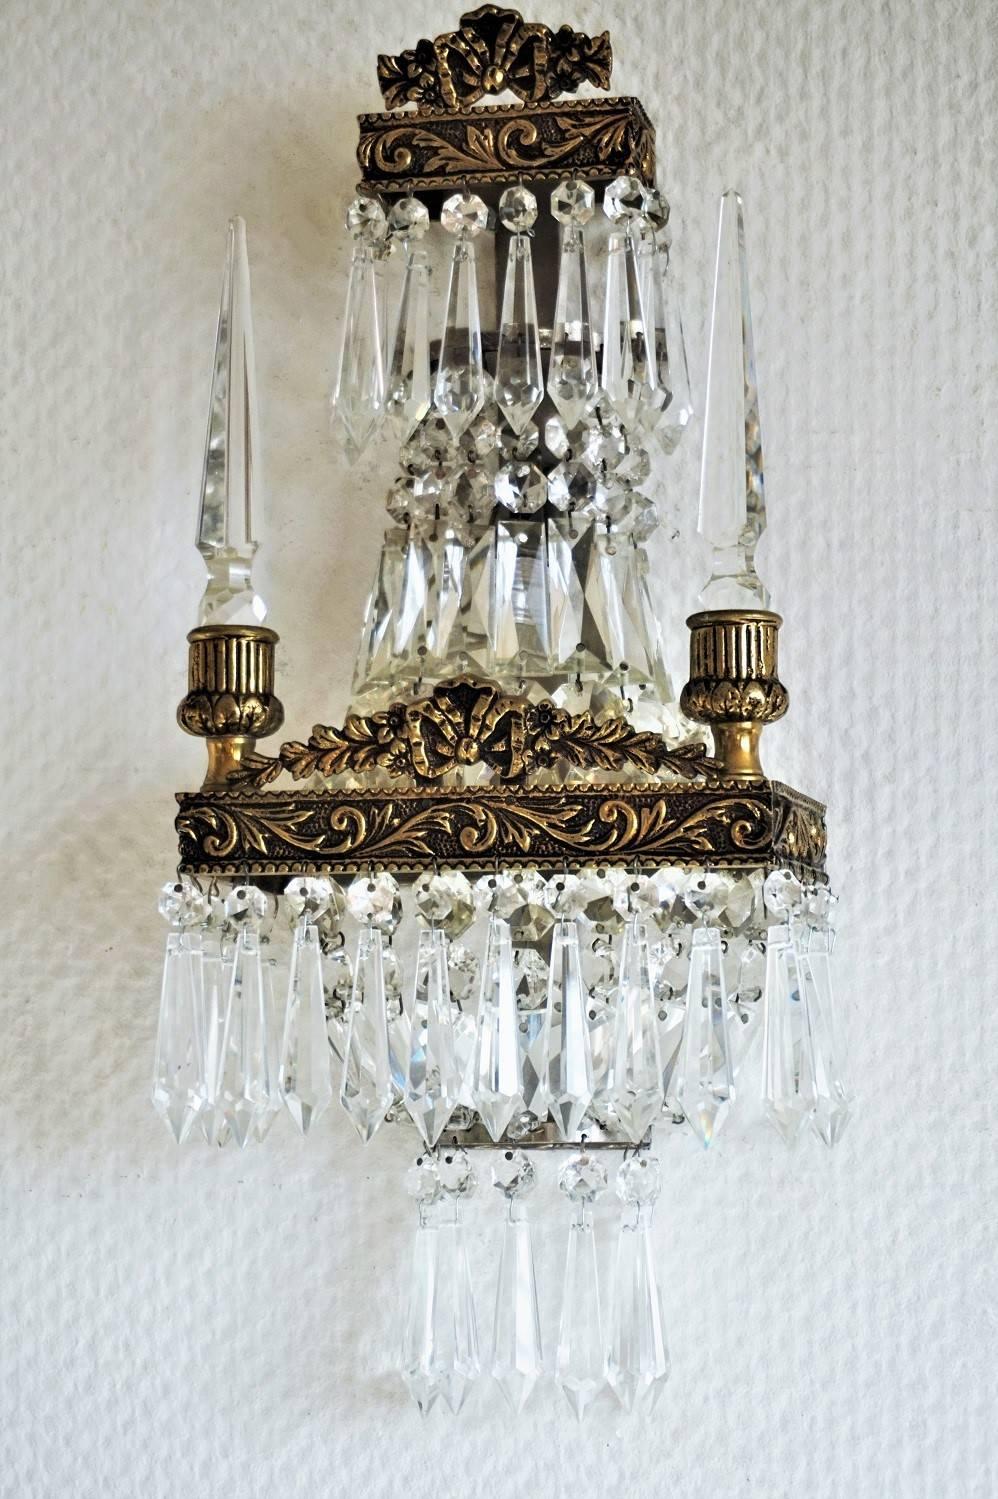 A lovely pair of French Empire style cut crystal and bronze wall sconces with cut shaped drops and cut crystal spires, 1900s.
Measures:
Height 17 in (43 cm)
Width 7.25 in (18.5 cm)
Depth 4 in (10 cm)
One light socket.

We have a fitting mirror at